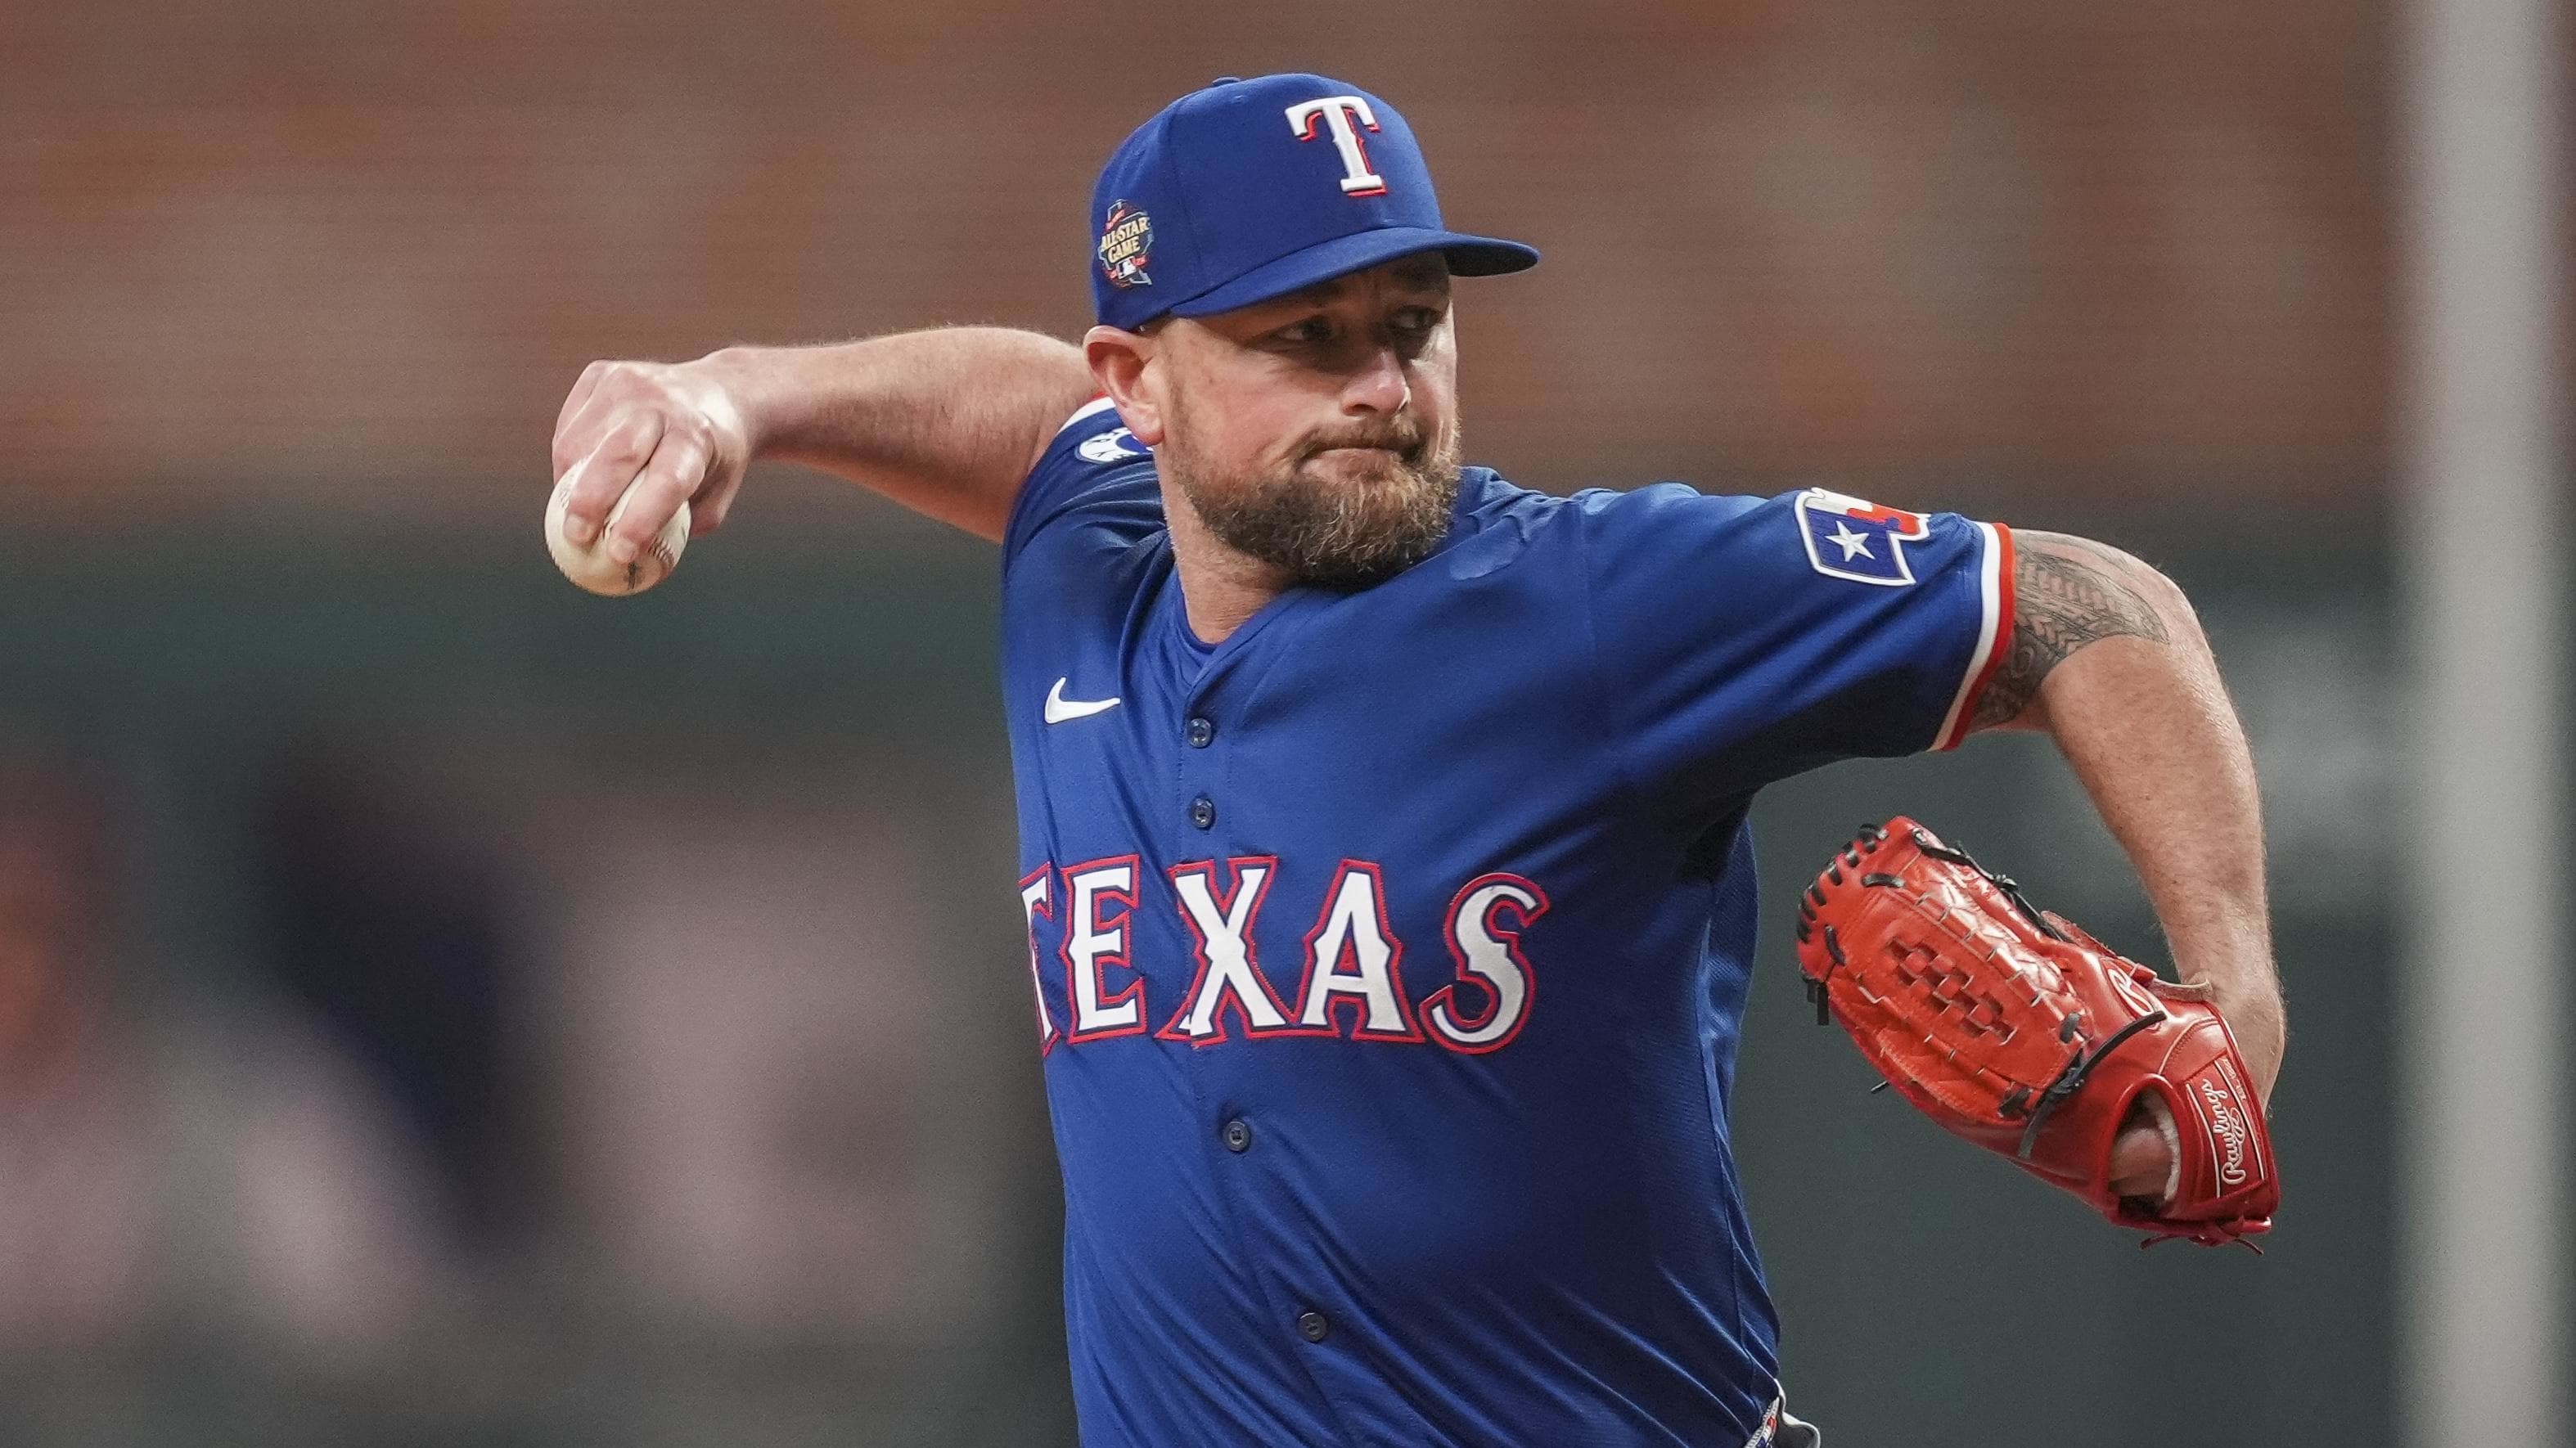 Texas Rangers Reliever: With Arm Injuries, Time For MLB To ‘Fix The Baseball’